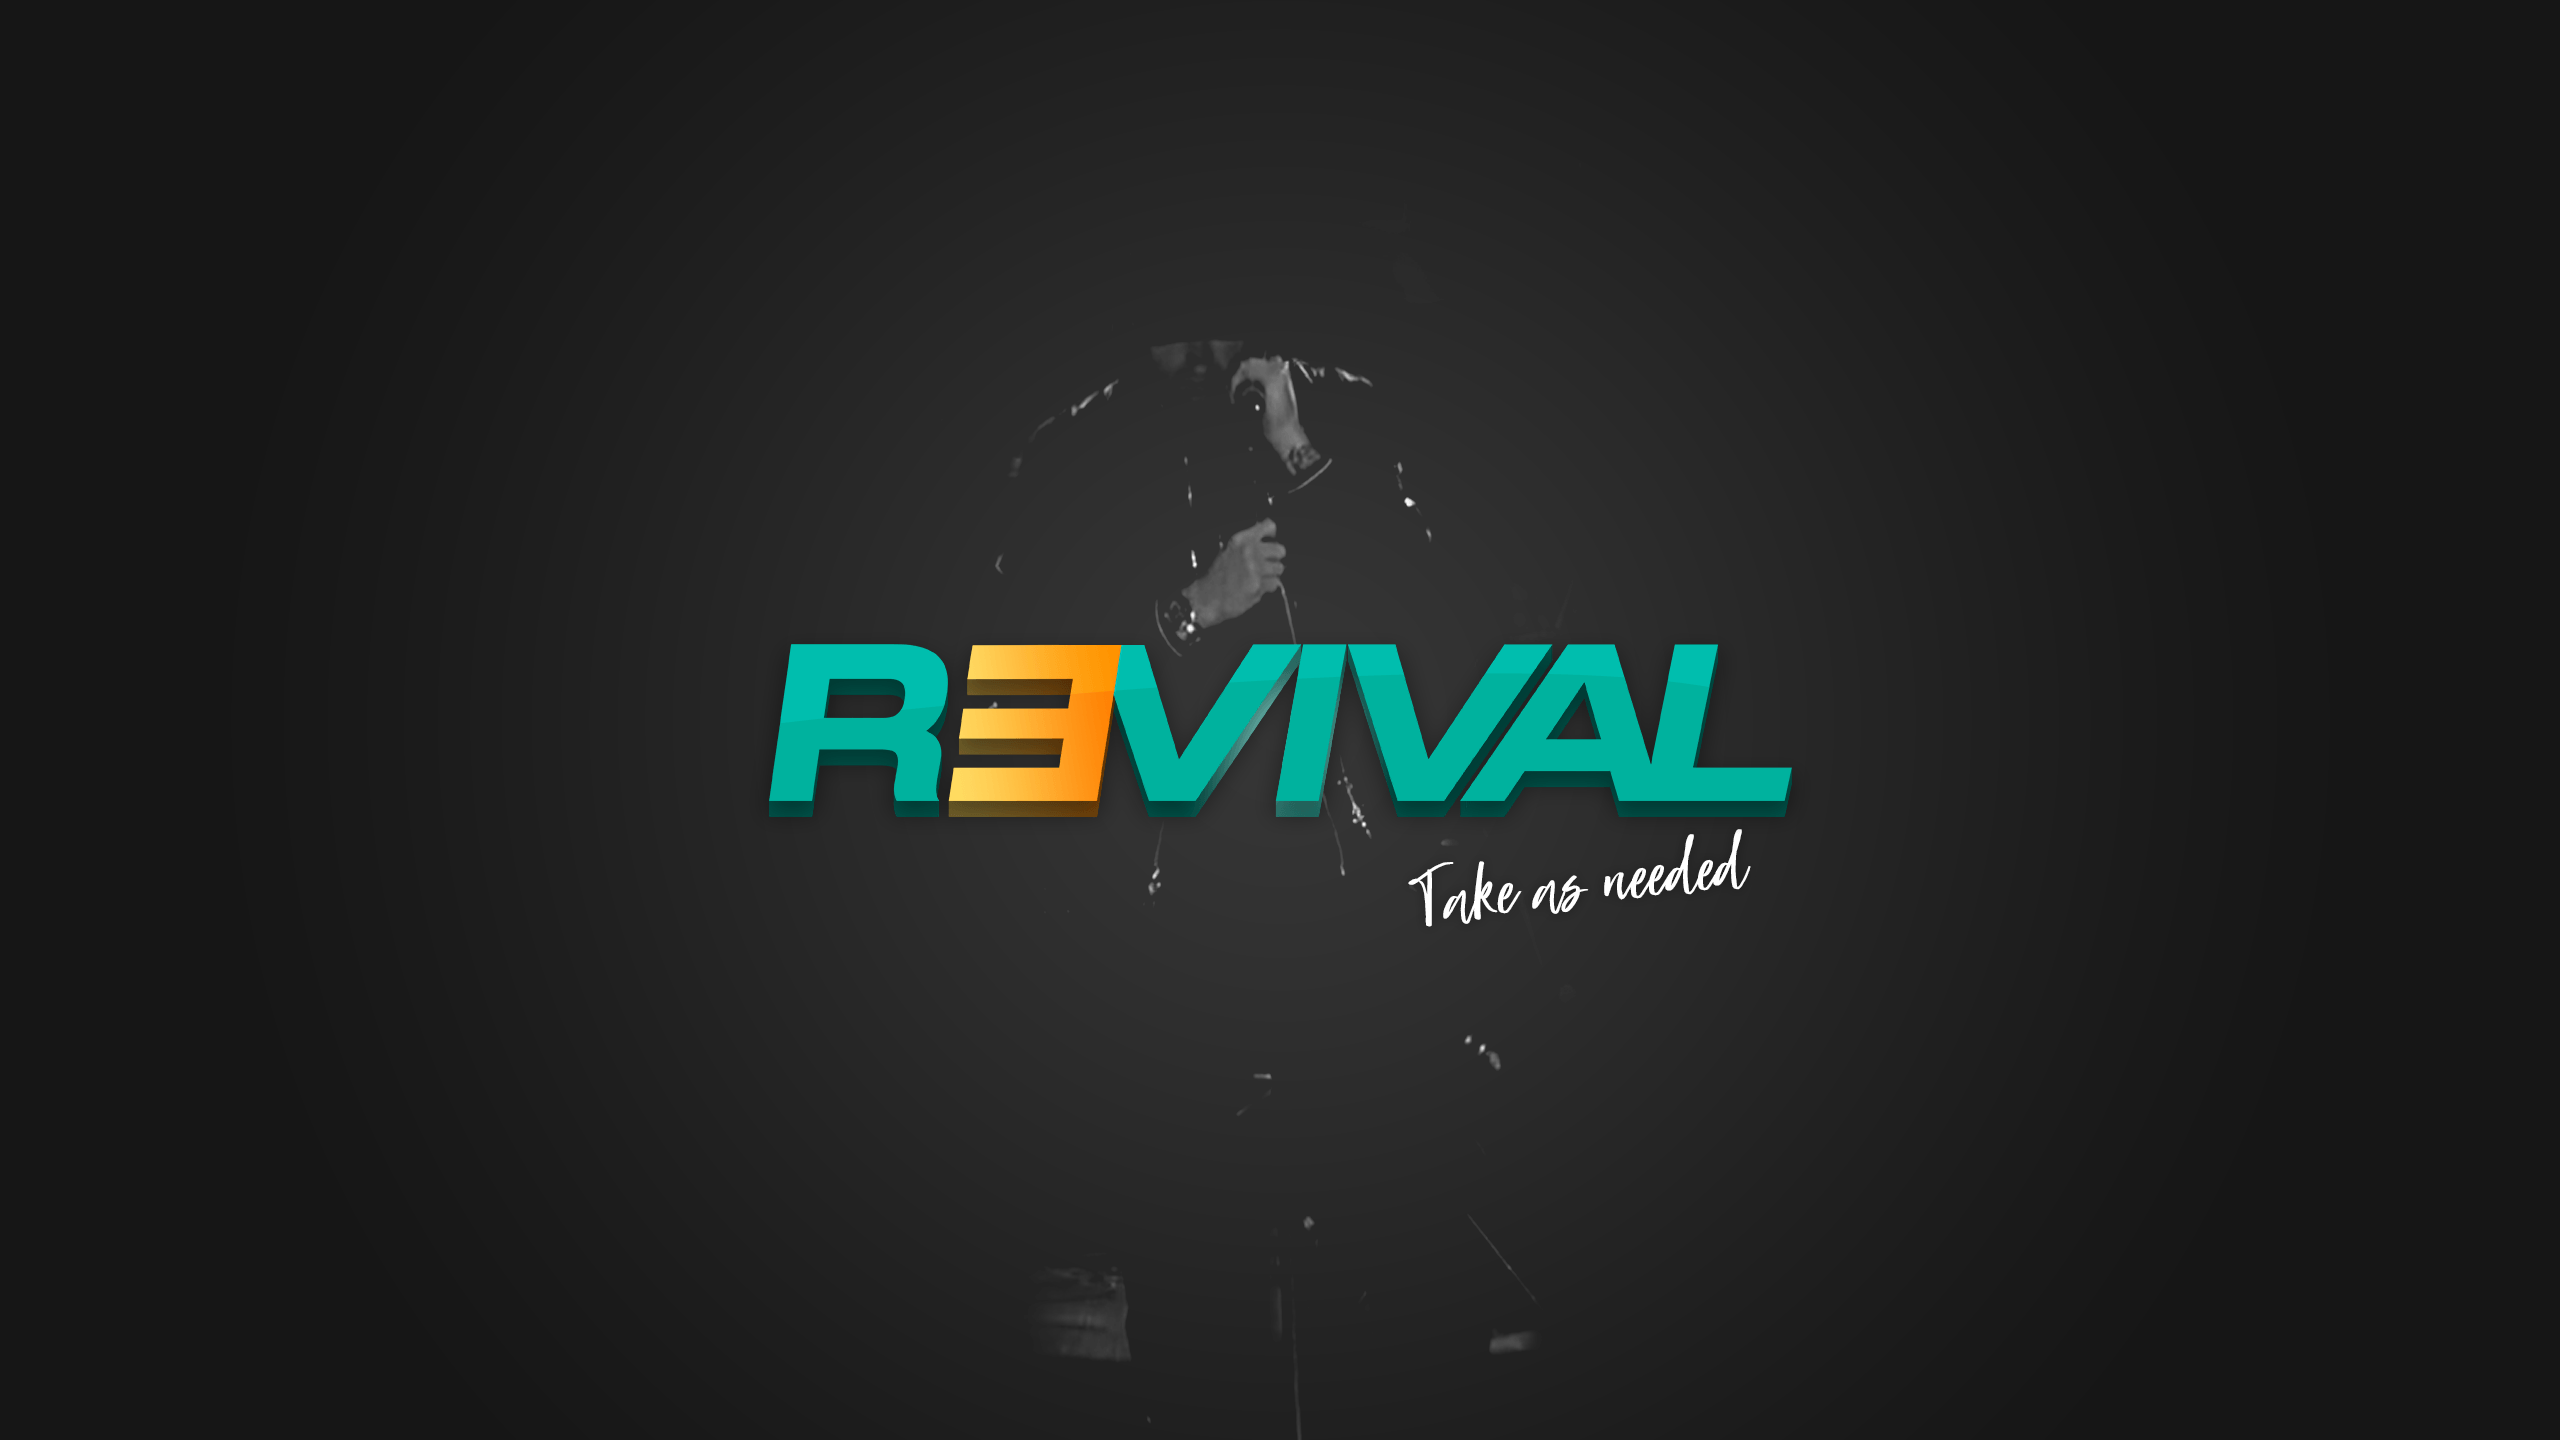 Decided to make a simple REVIVAL wallpaper